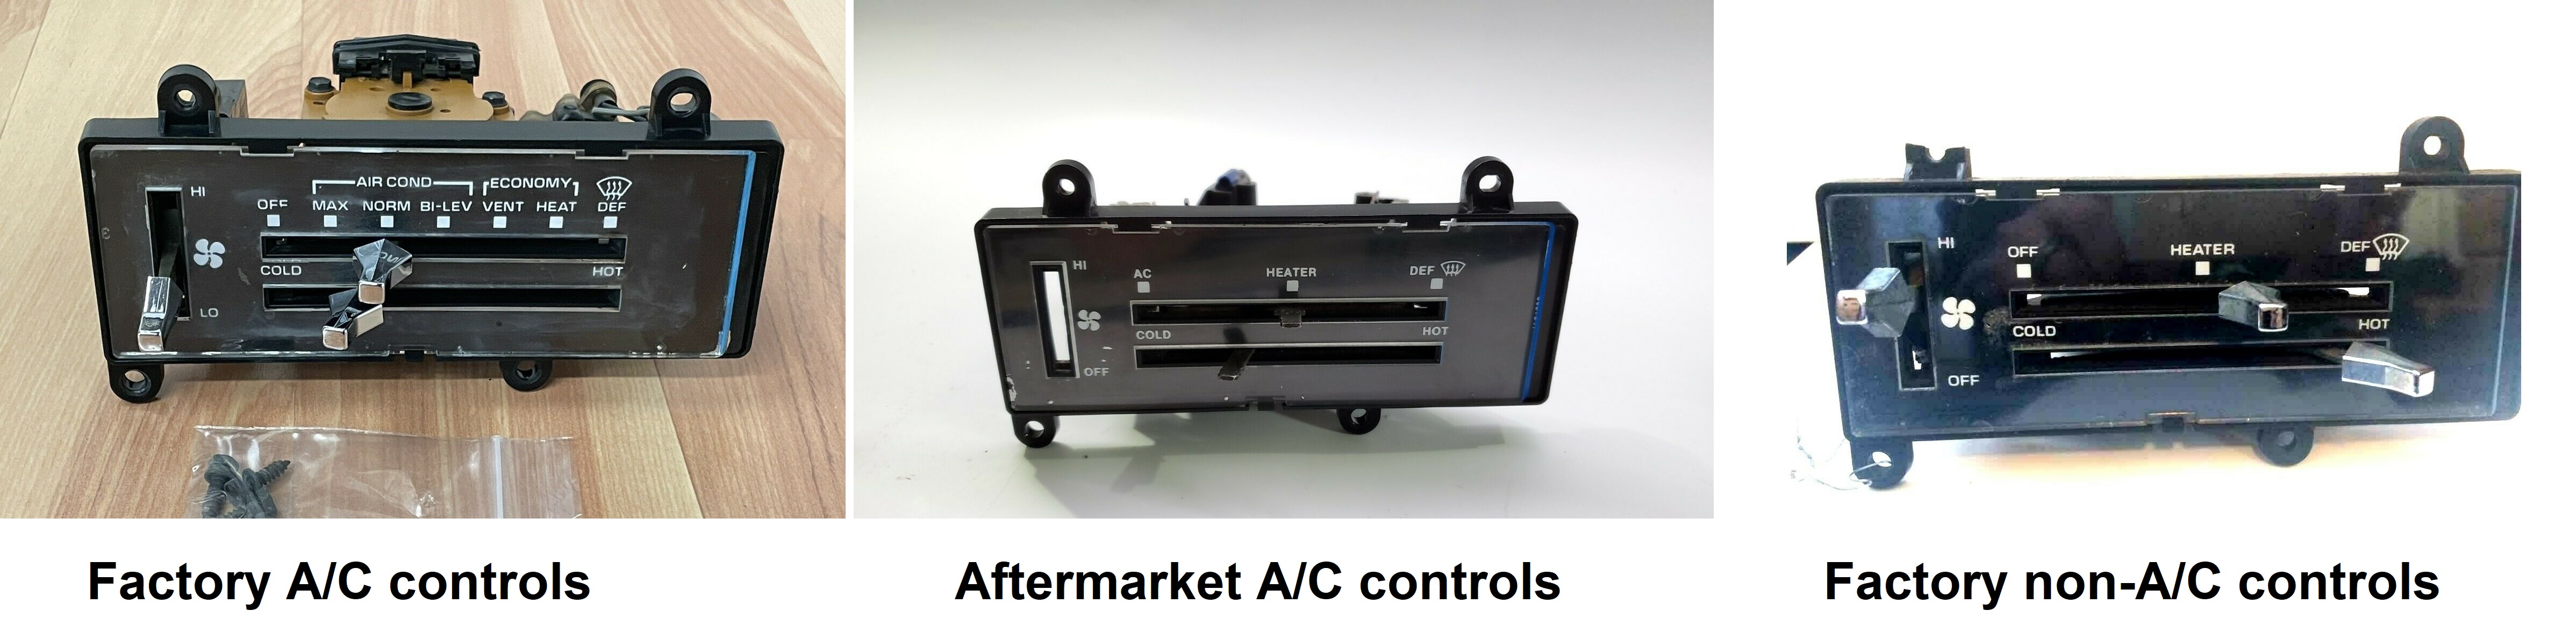 GMC 2500 aftermarket air conditioning